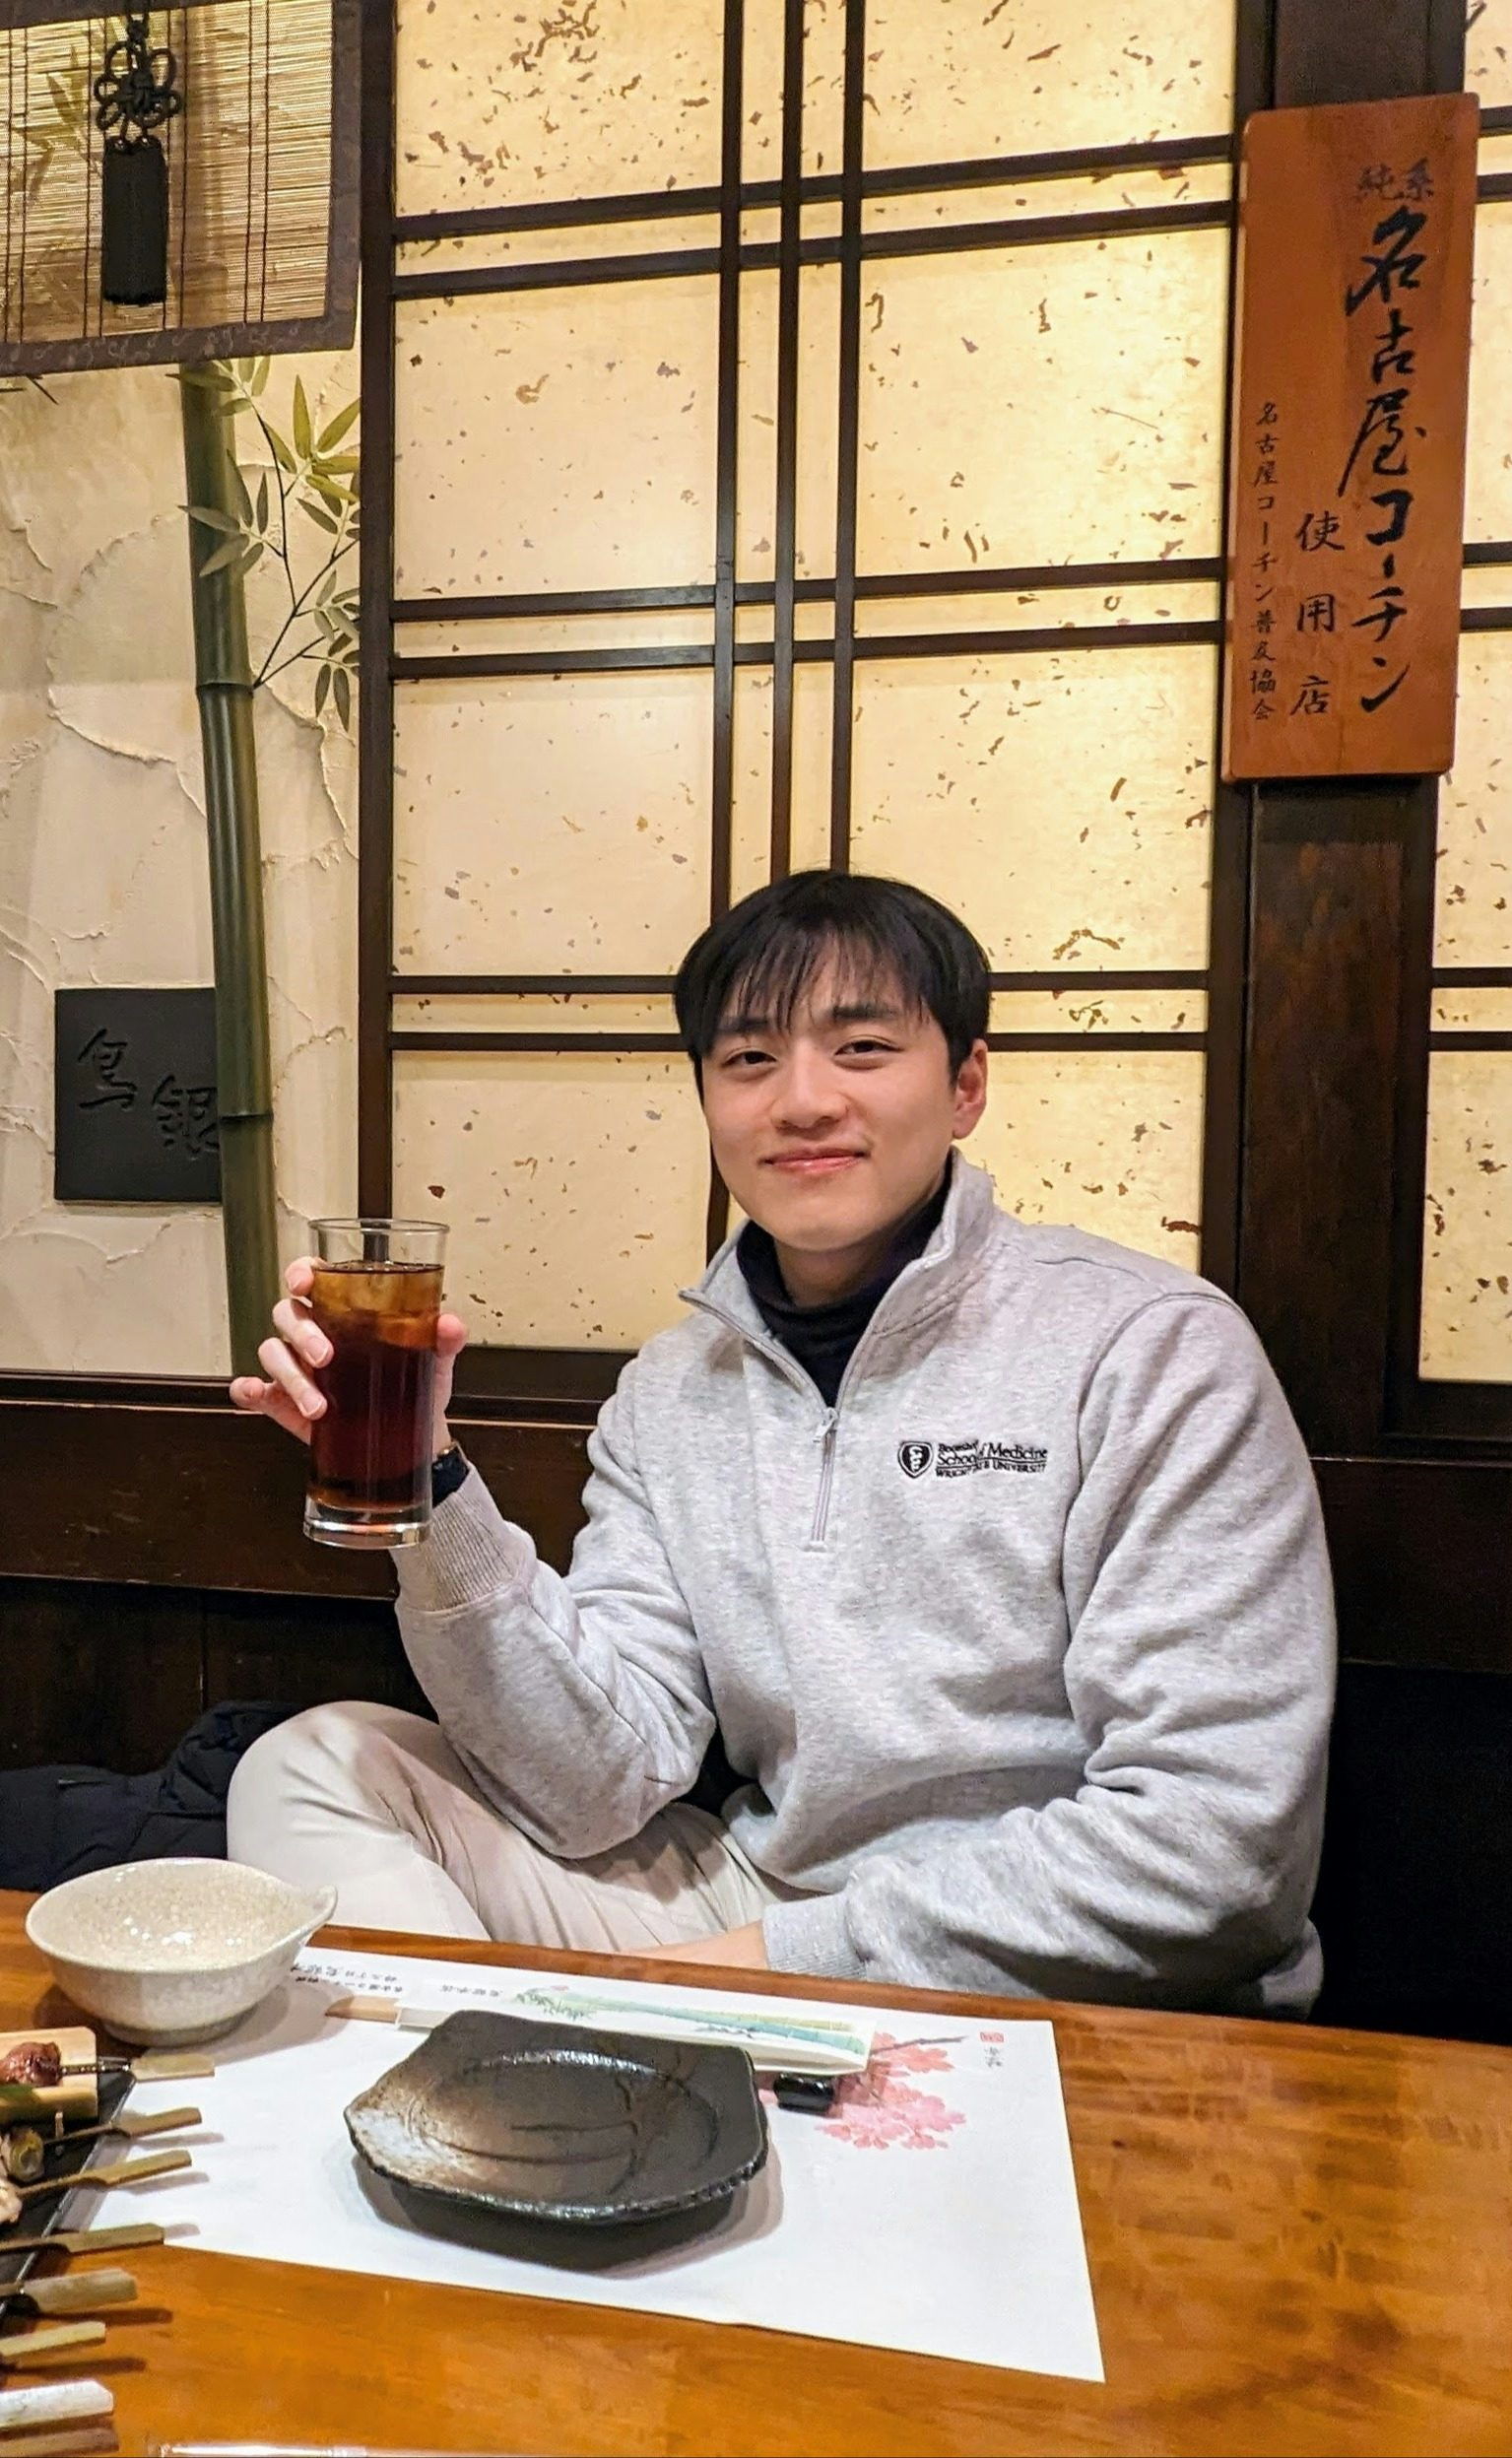 David Xiah posing with a drink in hand inside of a restaurant. 